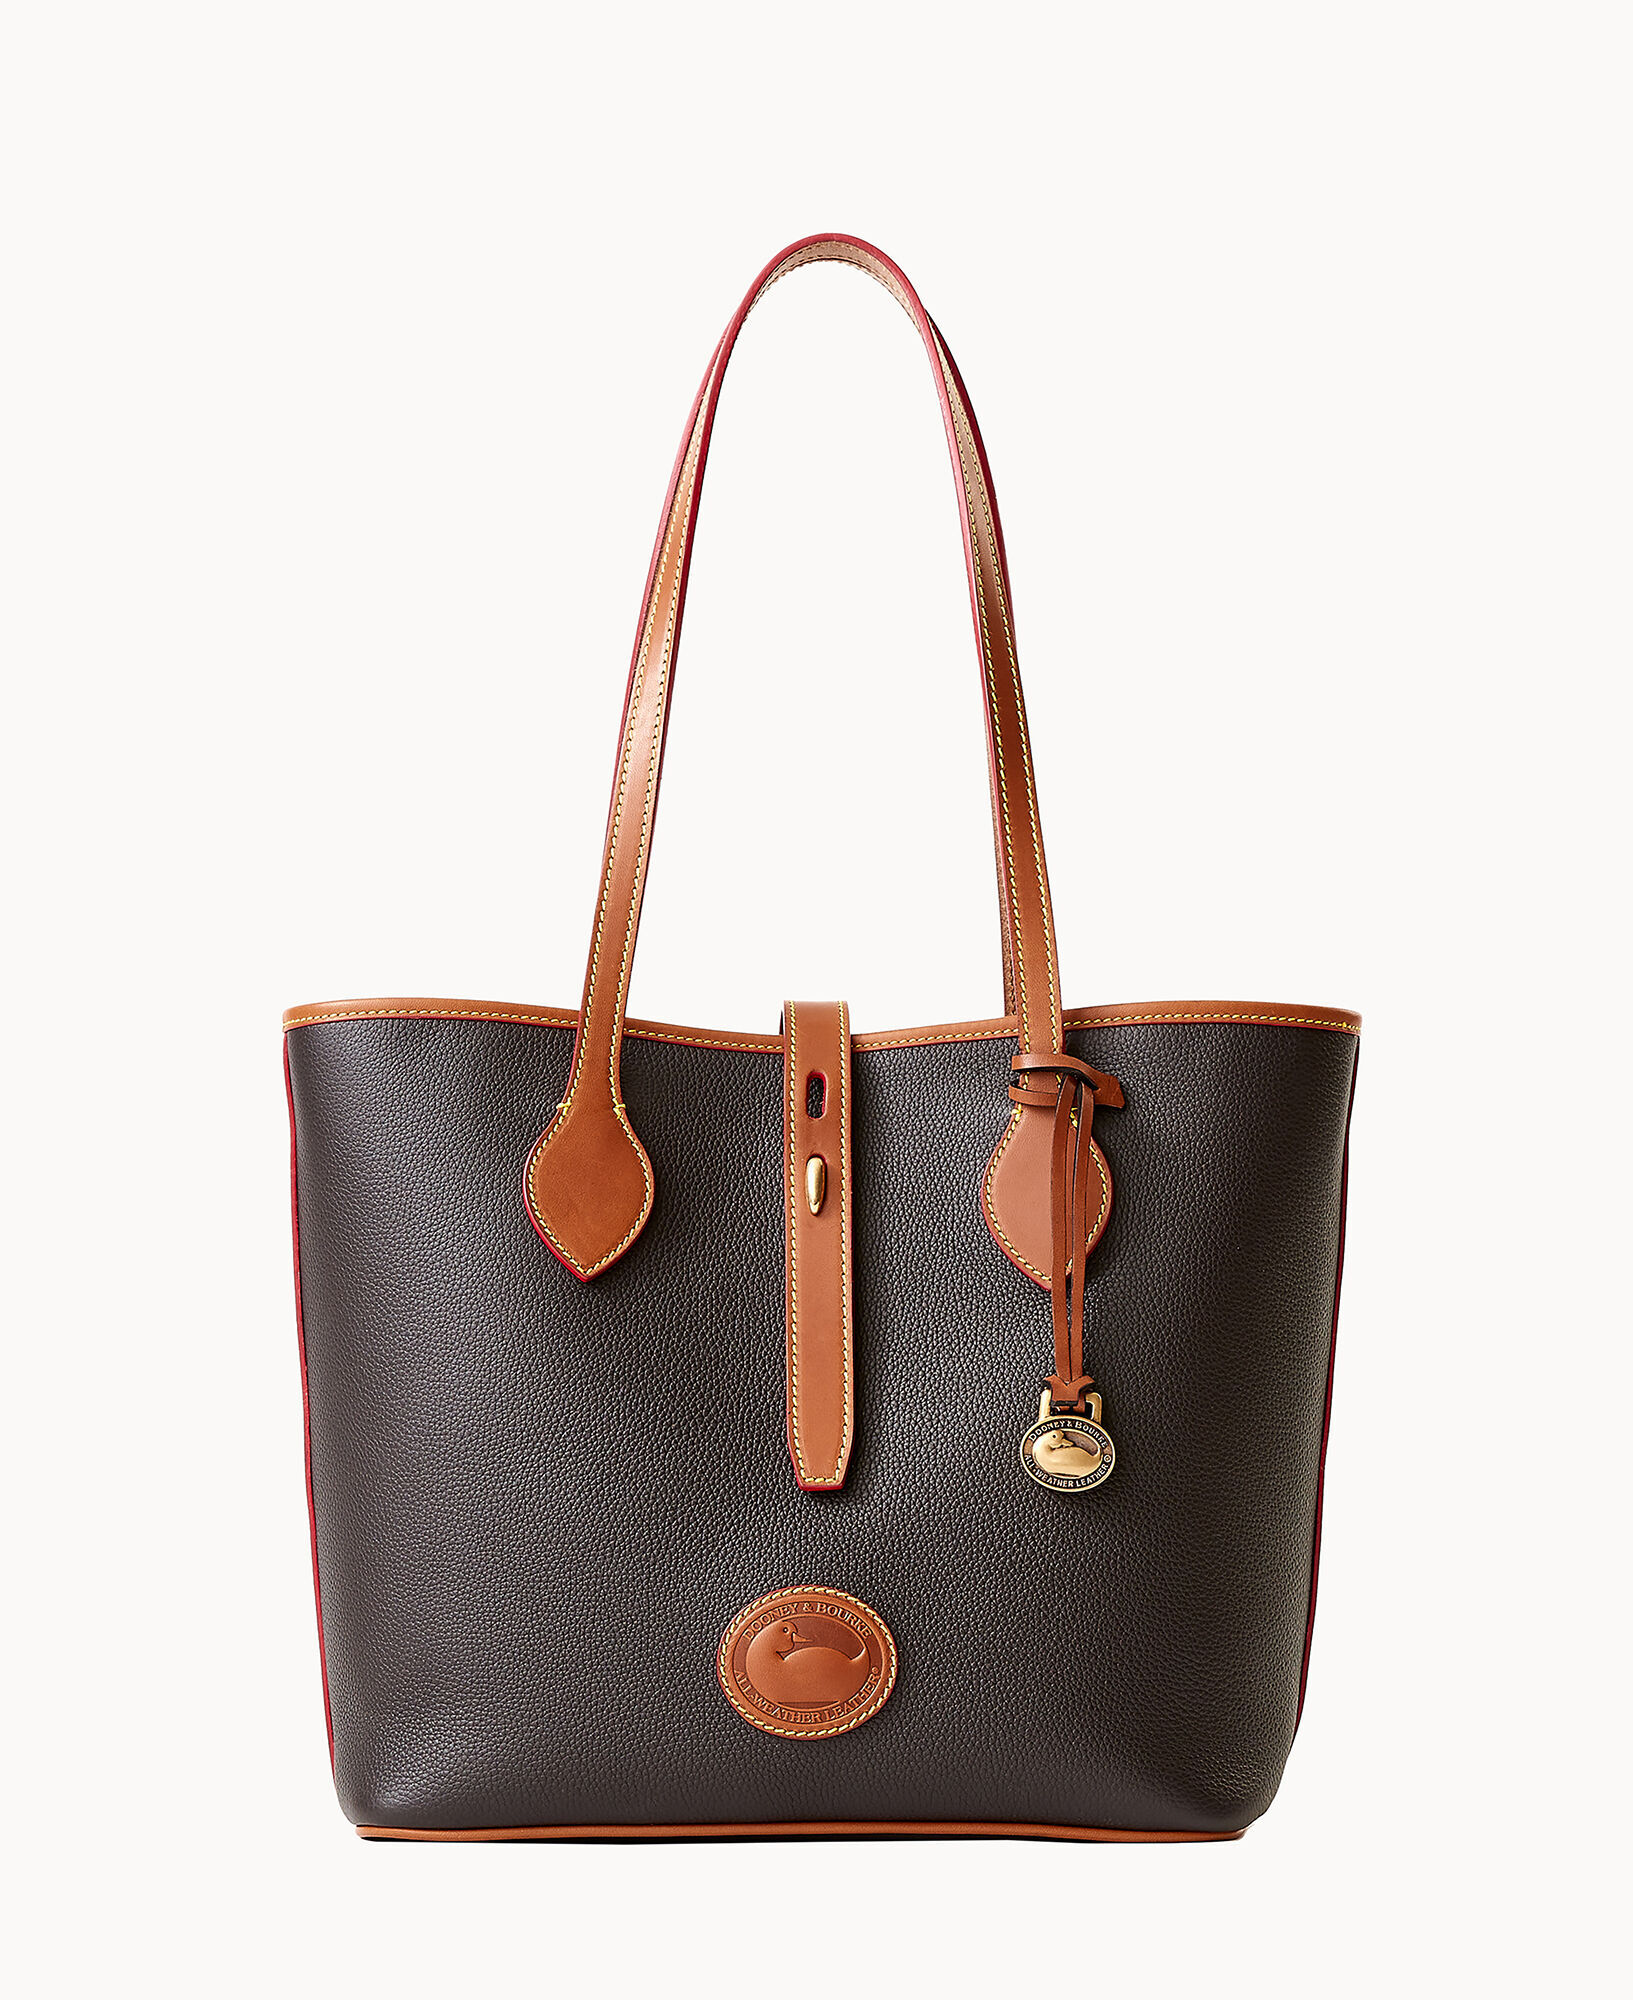 Dooney & Bourke All Weather Leather 3.0 Tote 36